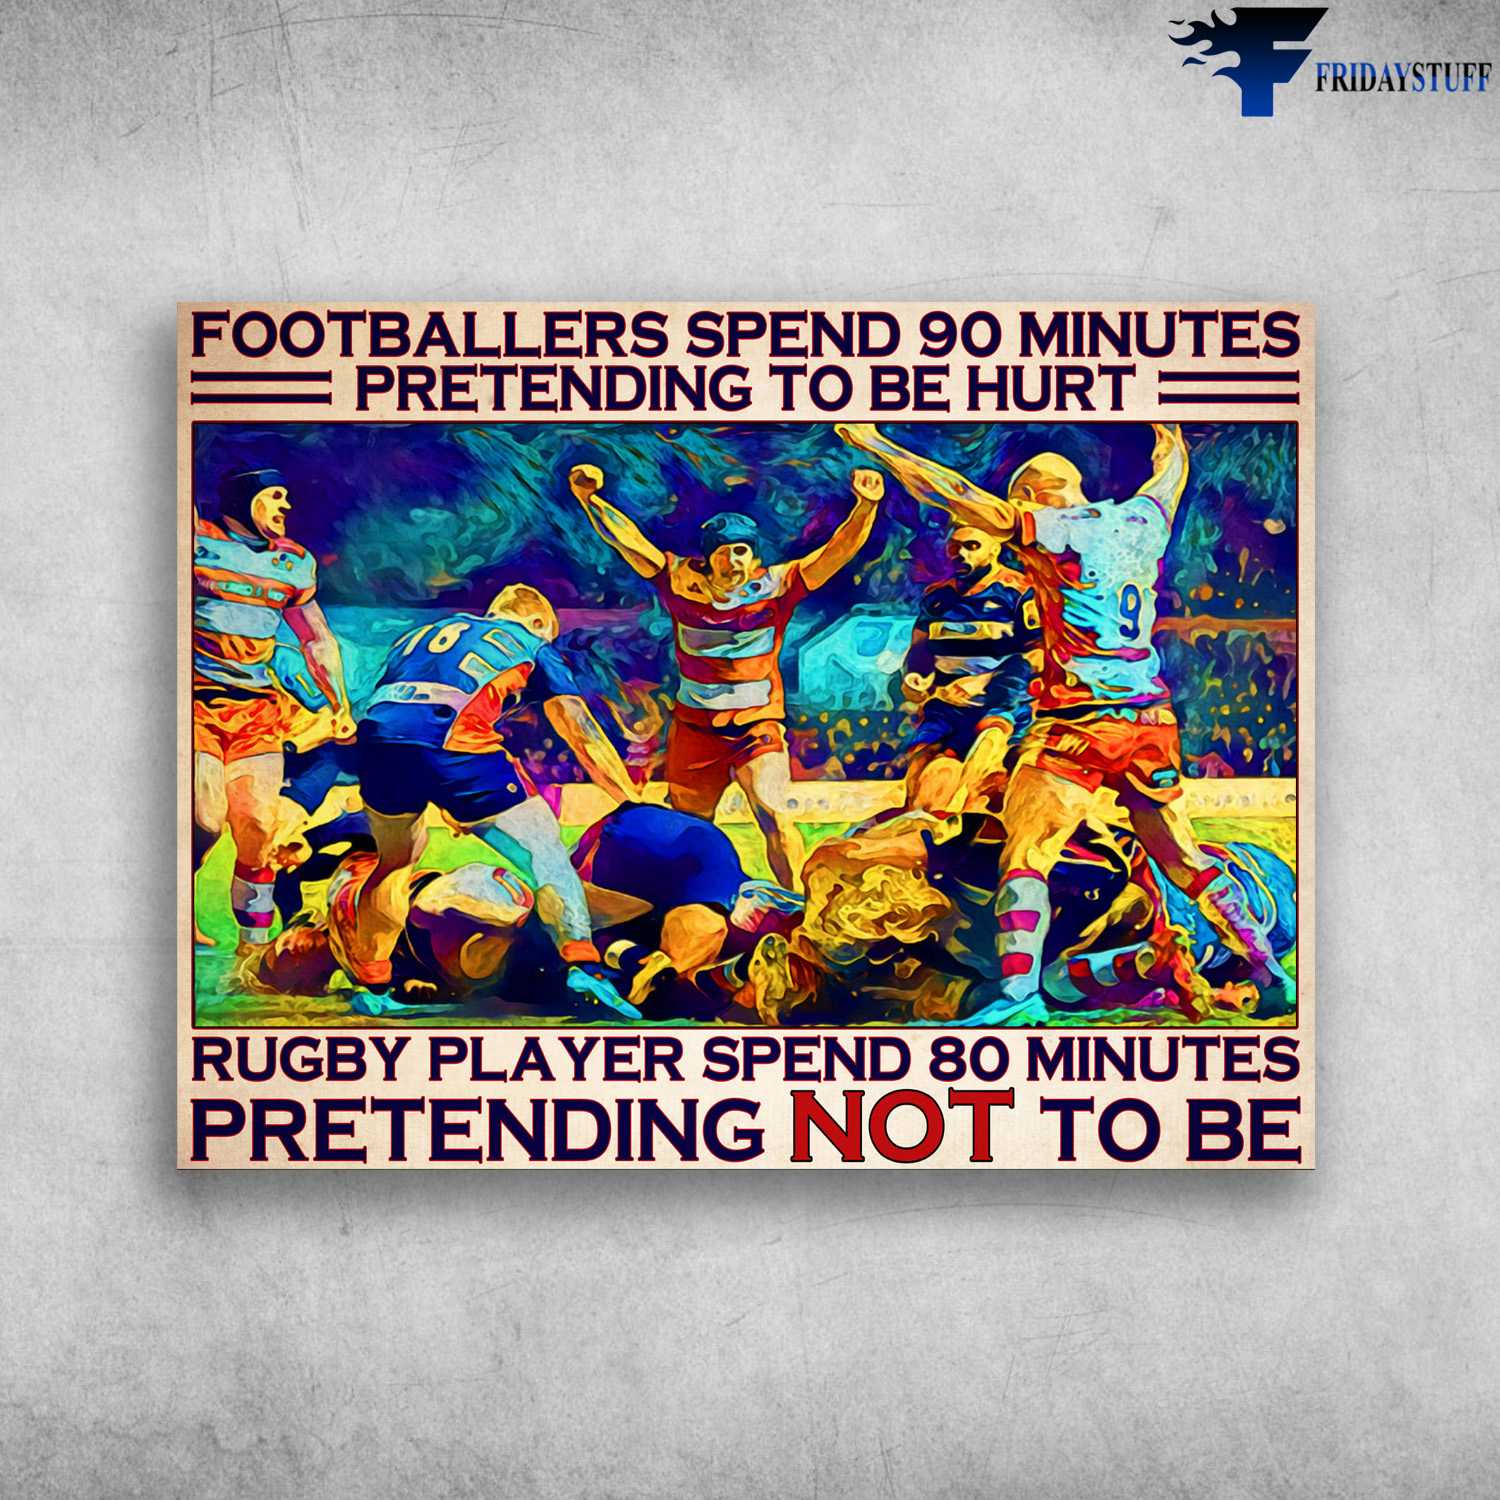 Rugby Player - Footballers Spend 90 Minute, Pretending To Be Hurt, Rugby Player Spend 80 Minutes, Pretending Not To Be